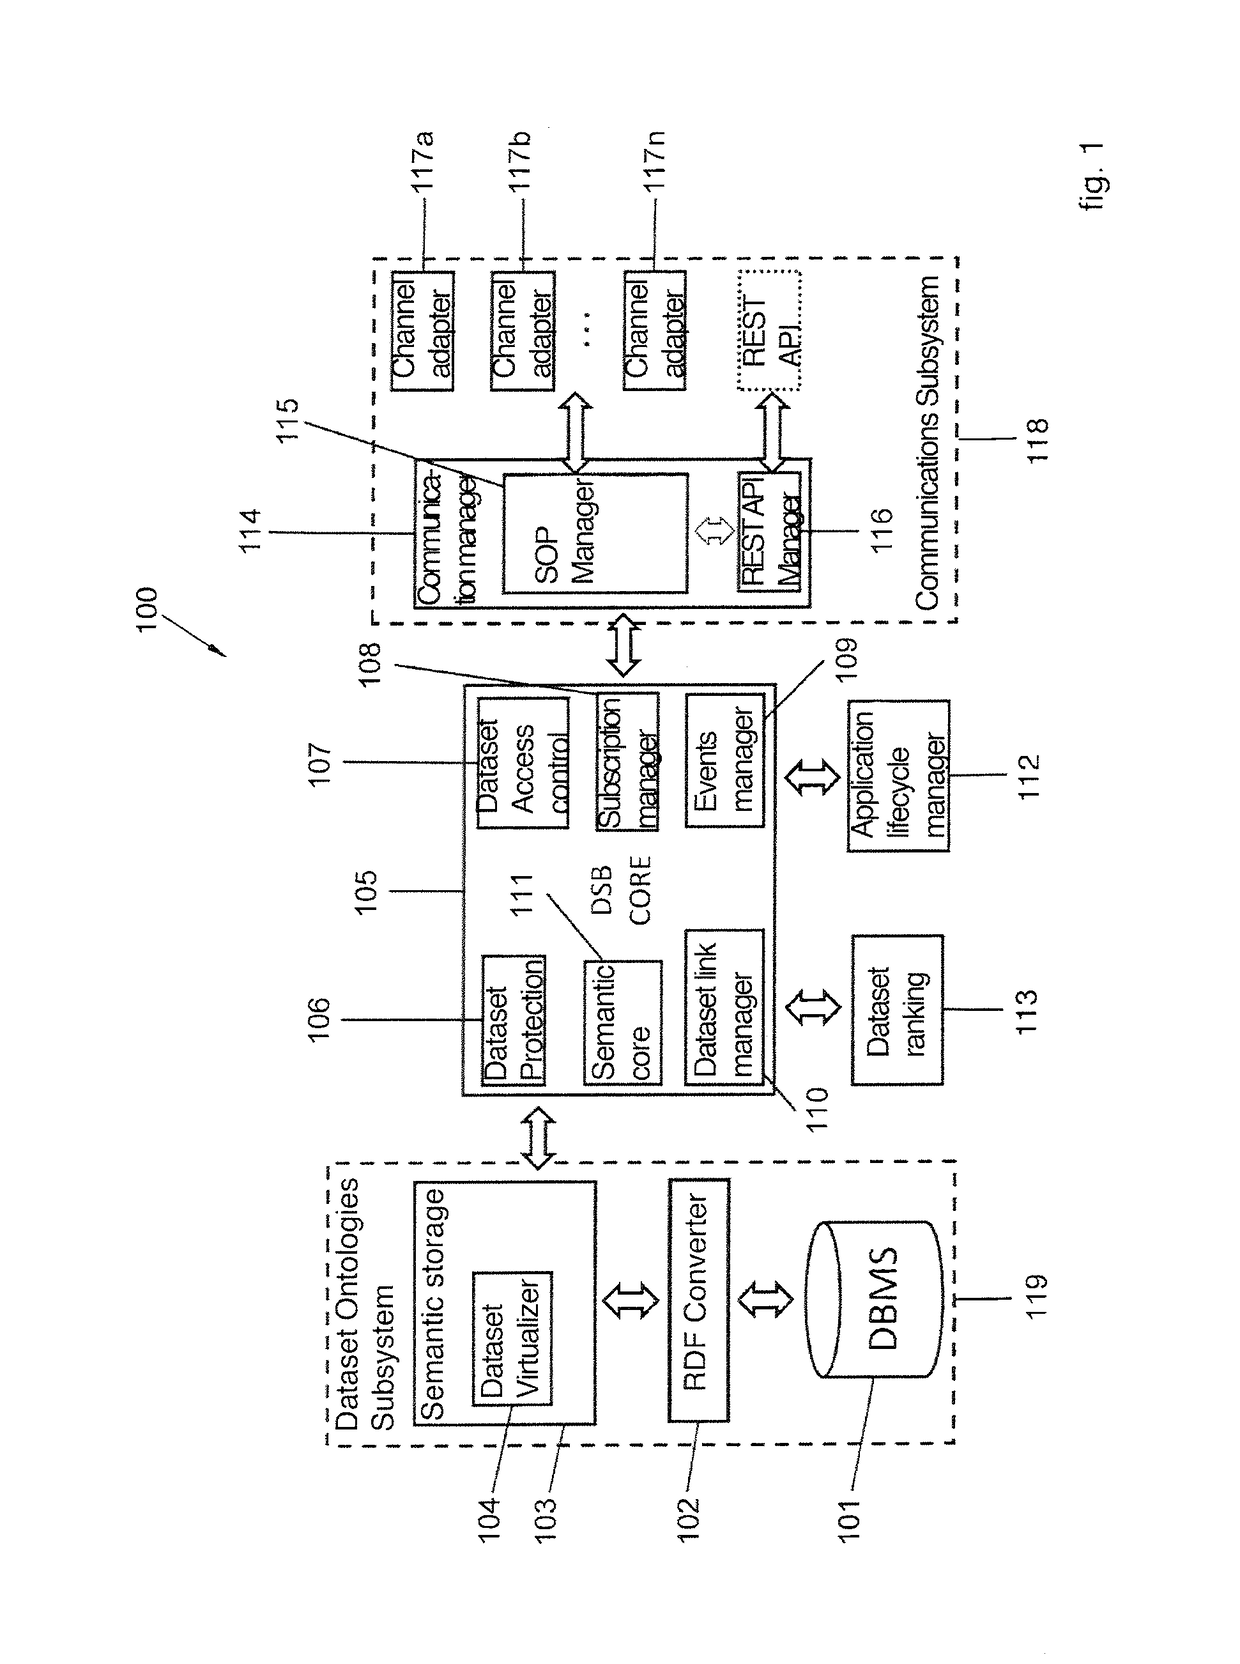 System and method for the data management in the interaction between machines